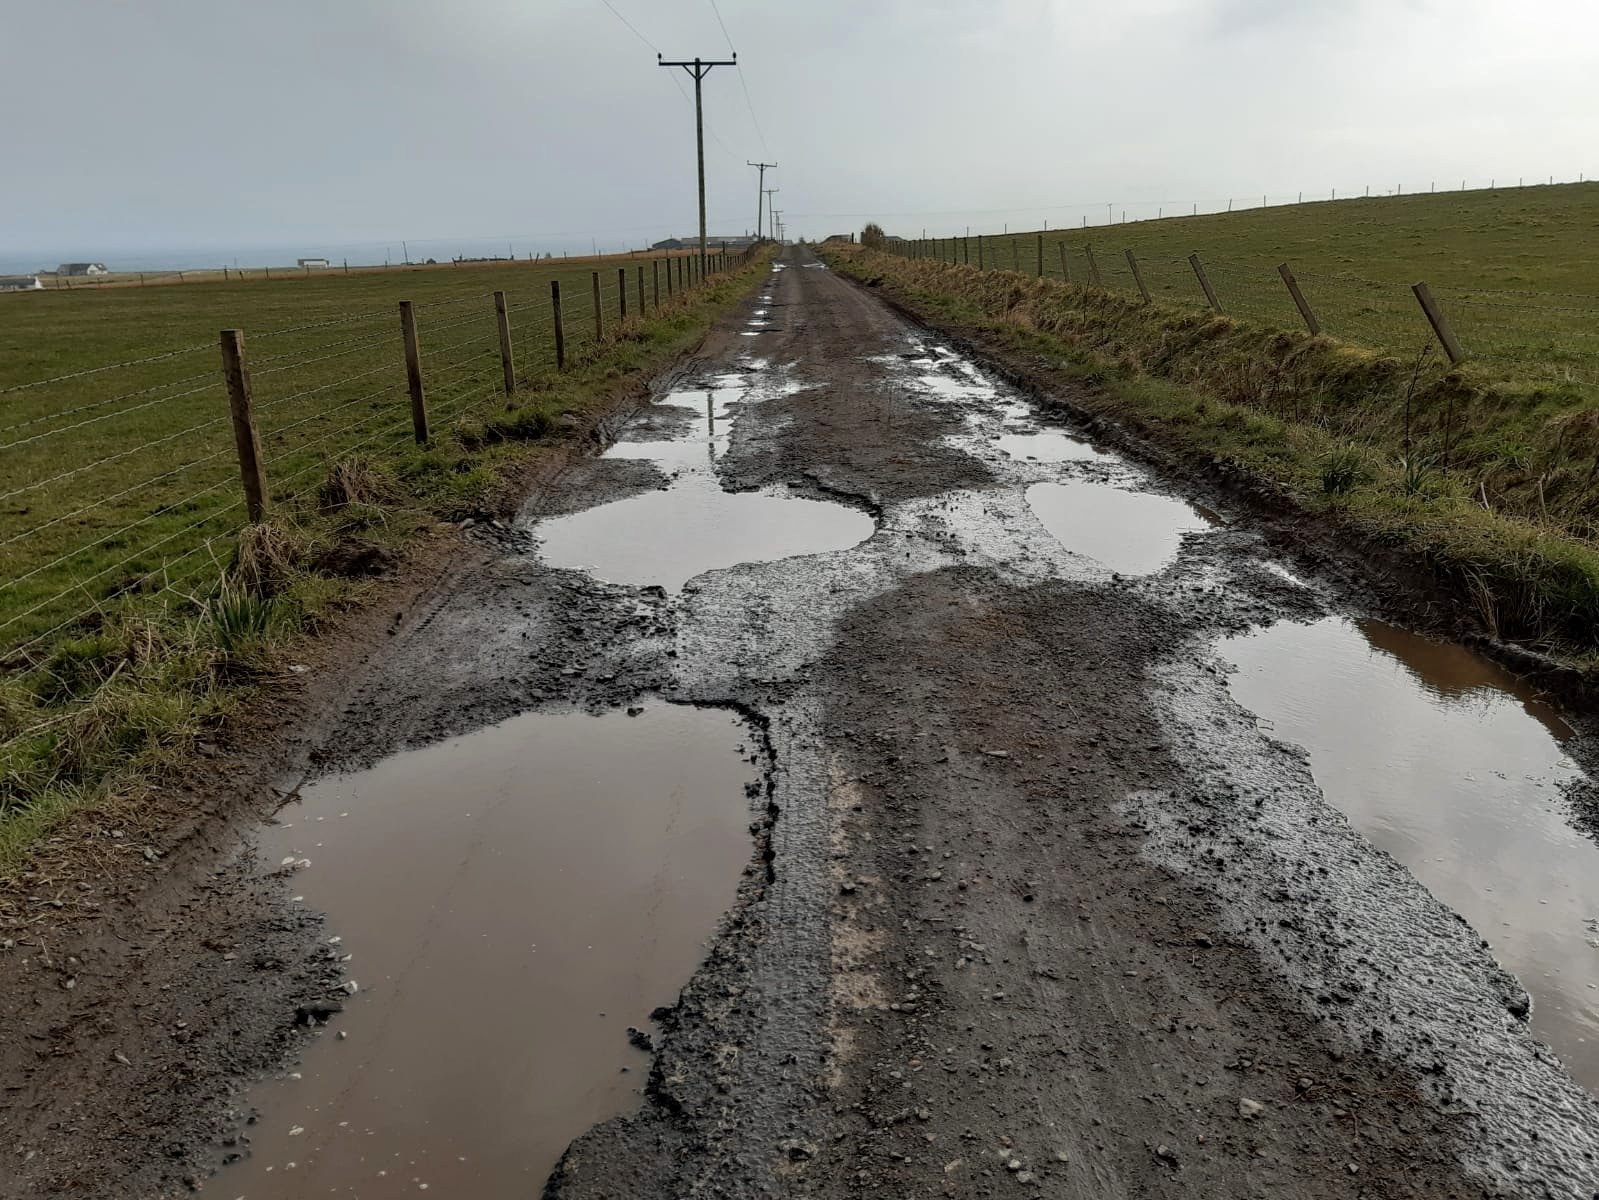 The group have been campaigning for urgent permanent repairs to local roads.